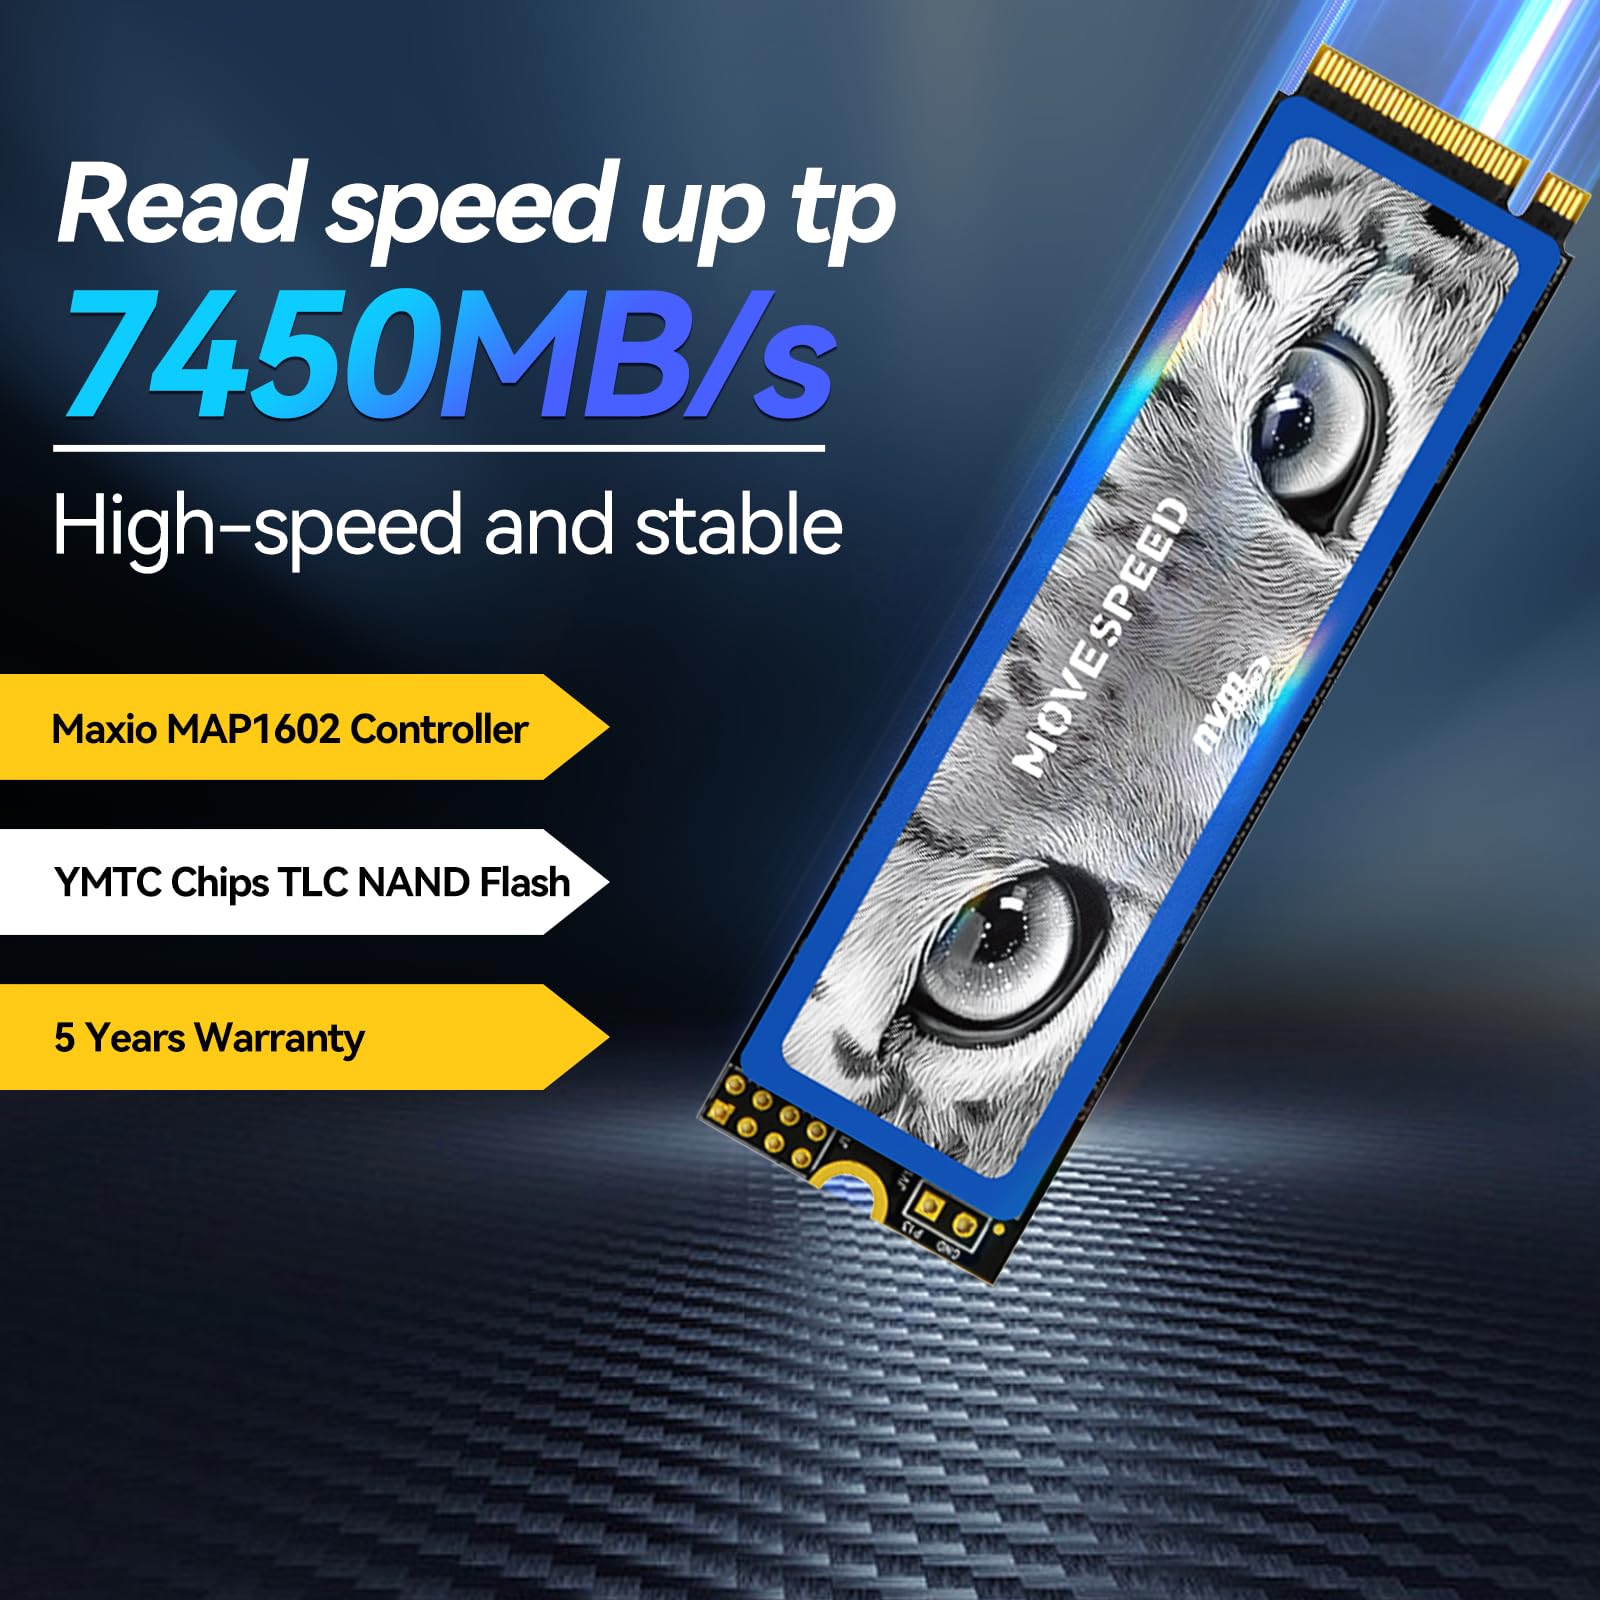 MOVE SPEED HB7450 2TB SSD for PS5 with Heatsink, PCIe 4.0 NVMe M.2 Internal Solid State Drive - Up to 7450MB/s, 3D NAND Storage Expansion Compatible with PS5, Desktops and Laptops